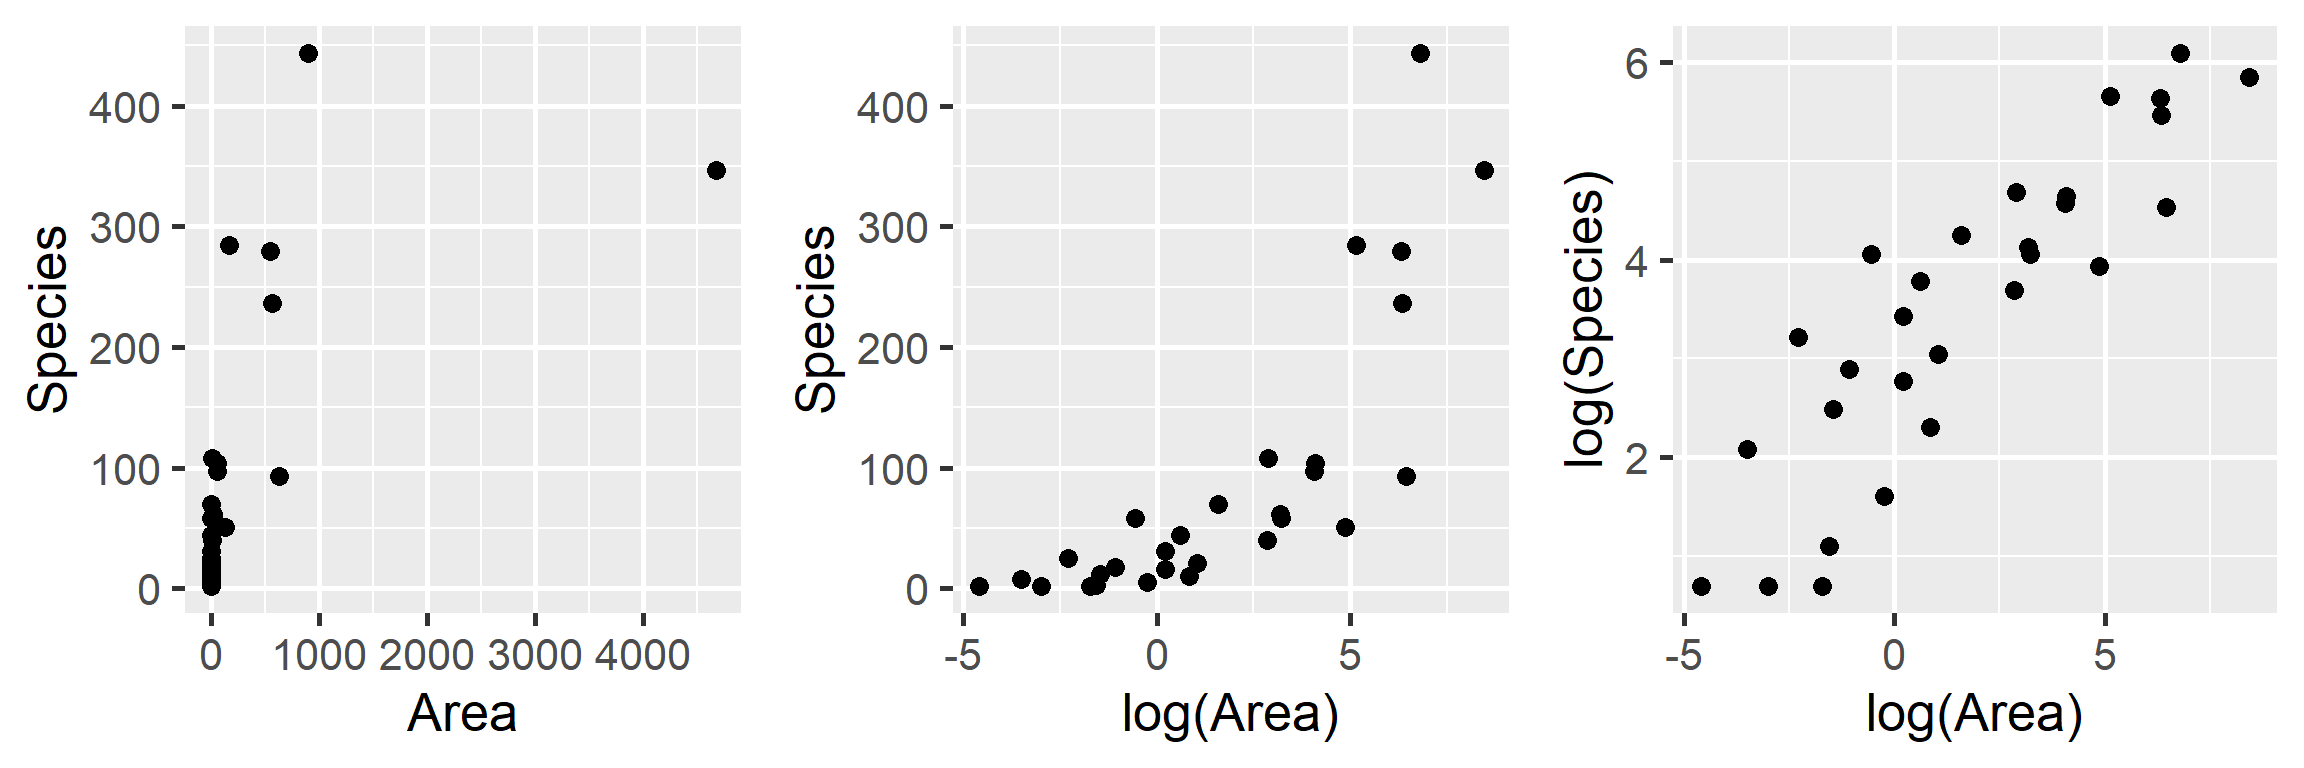 Plant species richness versus area for 29 islands in the Galapagos Islands archipelago. Data are from (Johnson & Raven, 1973).